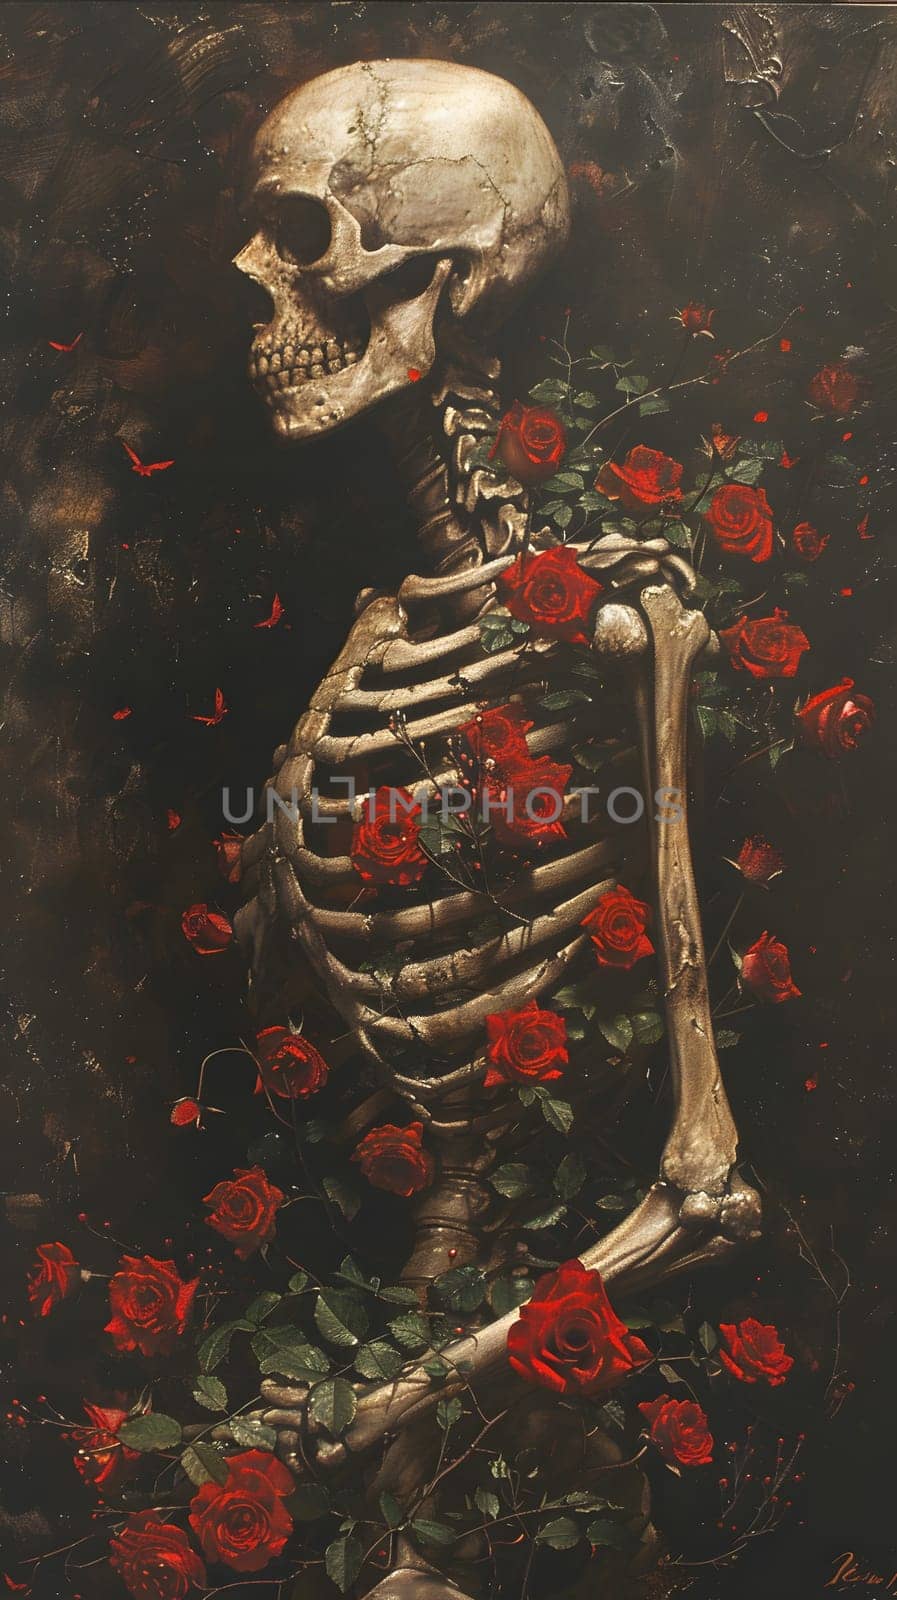 In a mesmerizing painting, a skeleton is encircled by vibrant red roses, creating a striking contrast of life and death in a symbolic representation of mortality and beauty